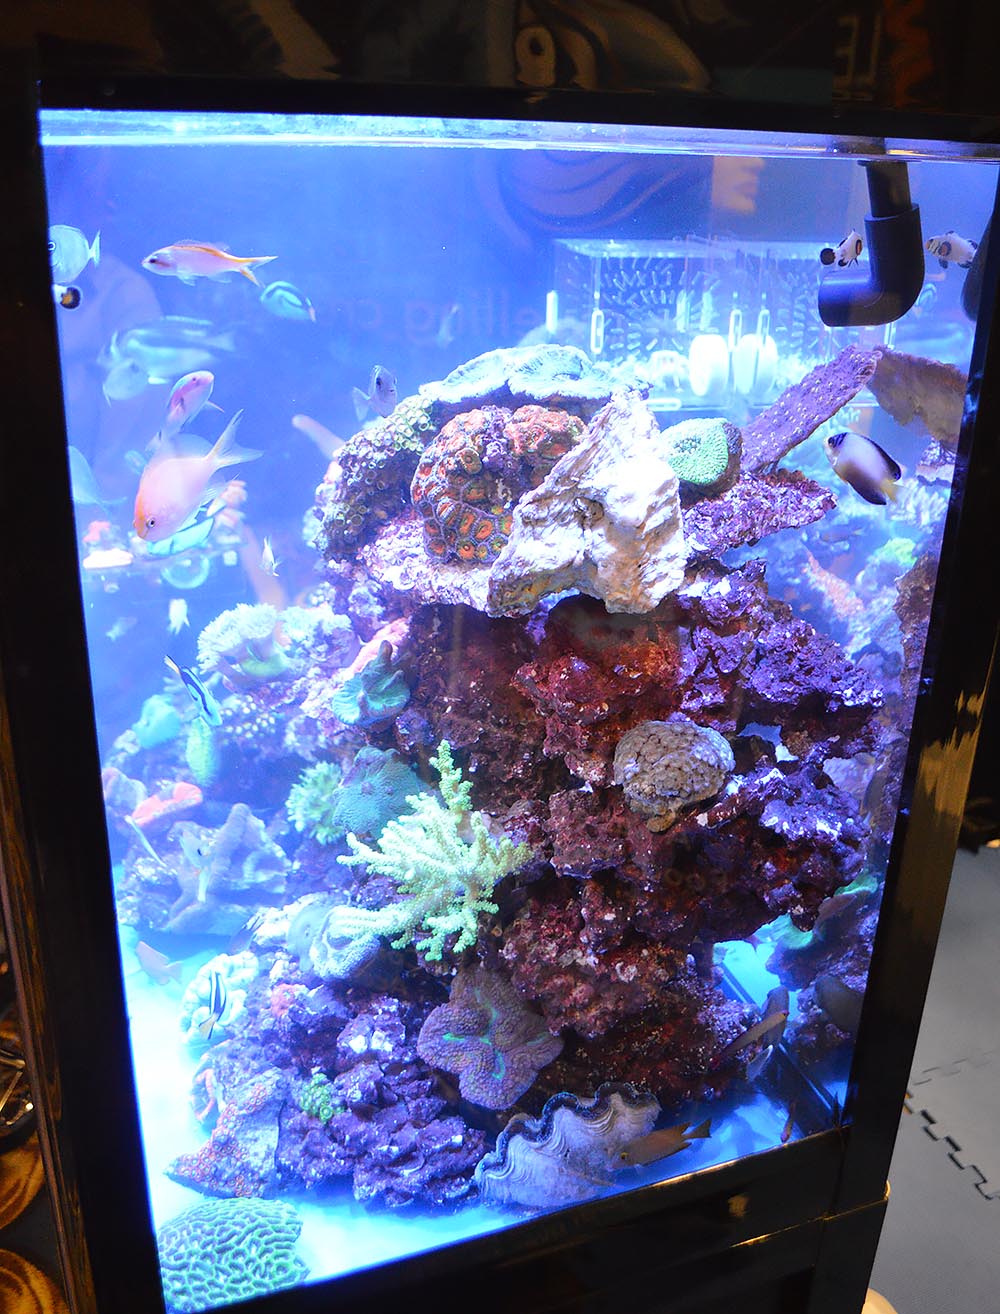 A look at SDC's reef display from the side.